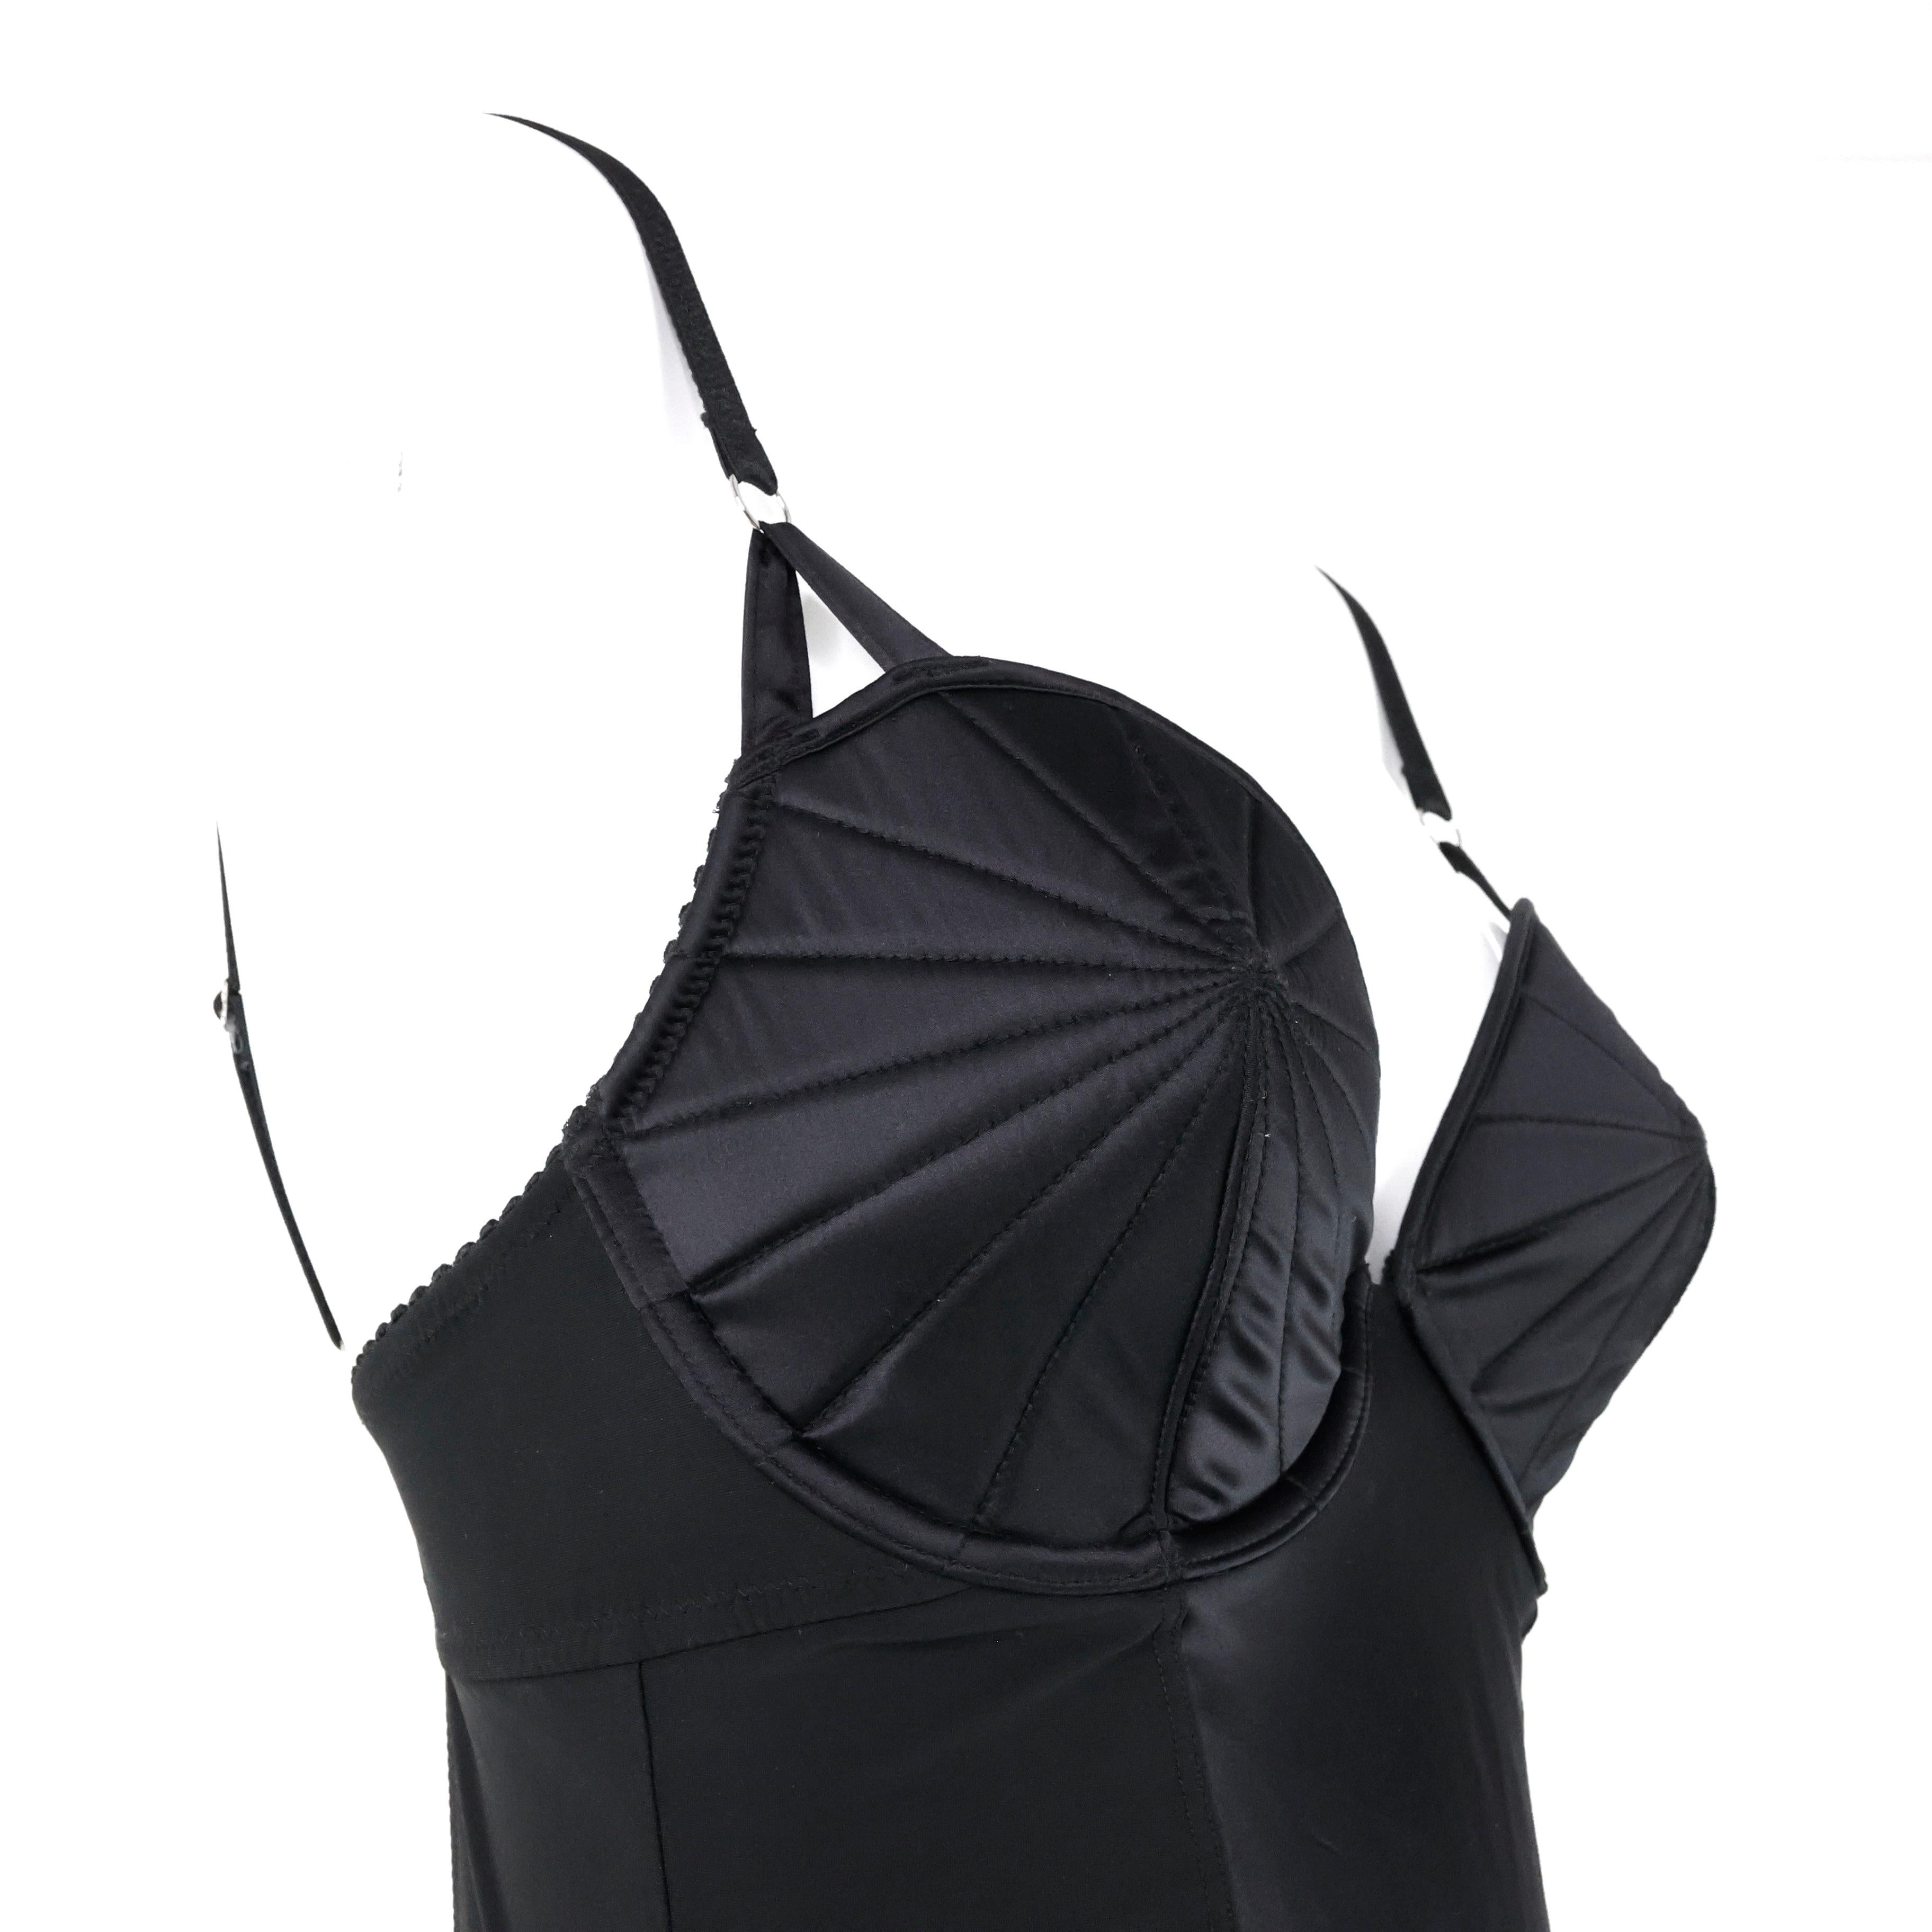 Jean Paul Gaultier Iconic black satin bodysuit, iconic bra style created for Madonna for her Blonde Ambition tour in the 90s. Size 75C (EU)

Condition:
Excellent.